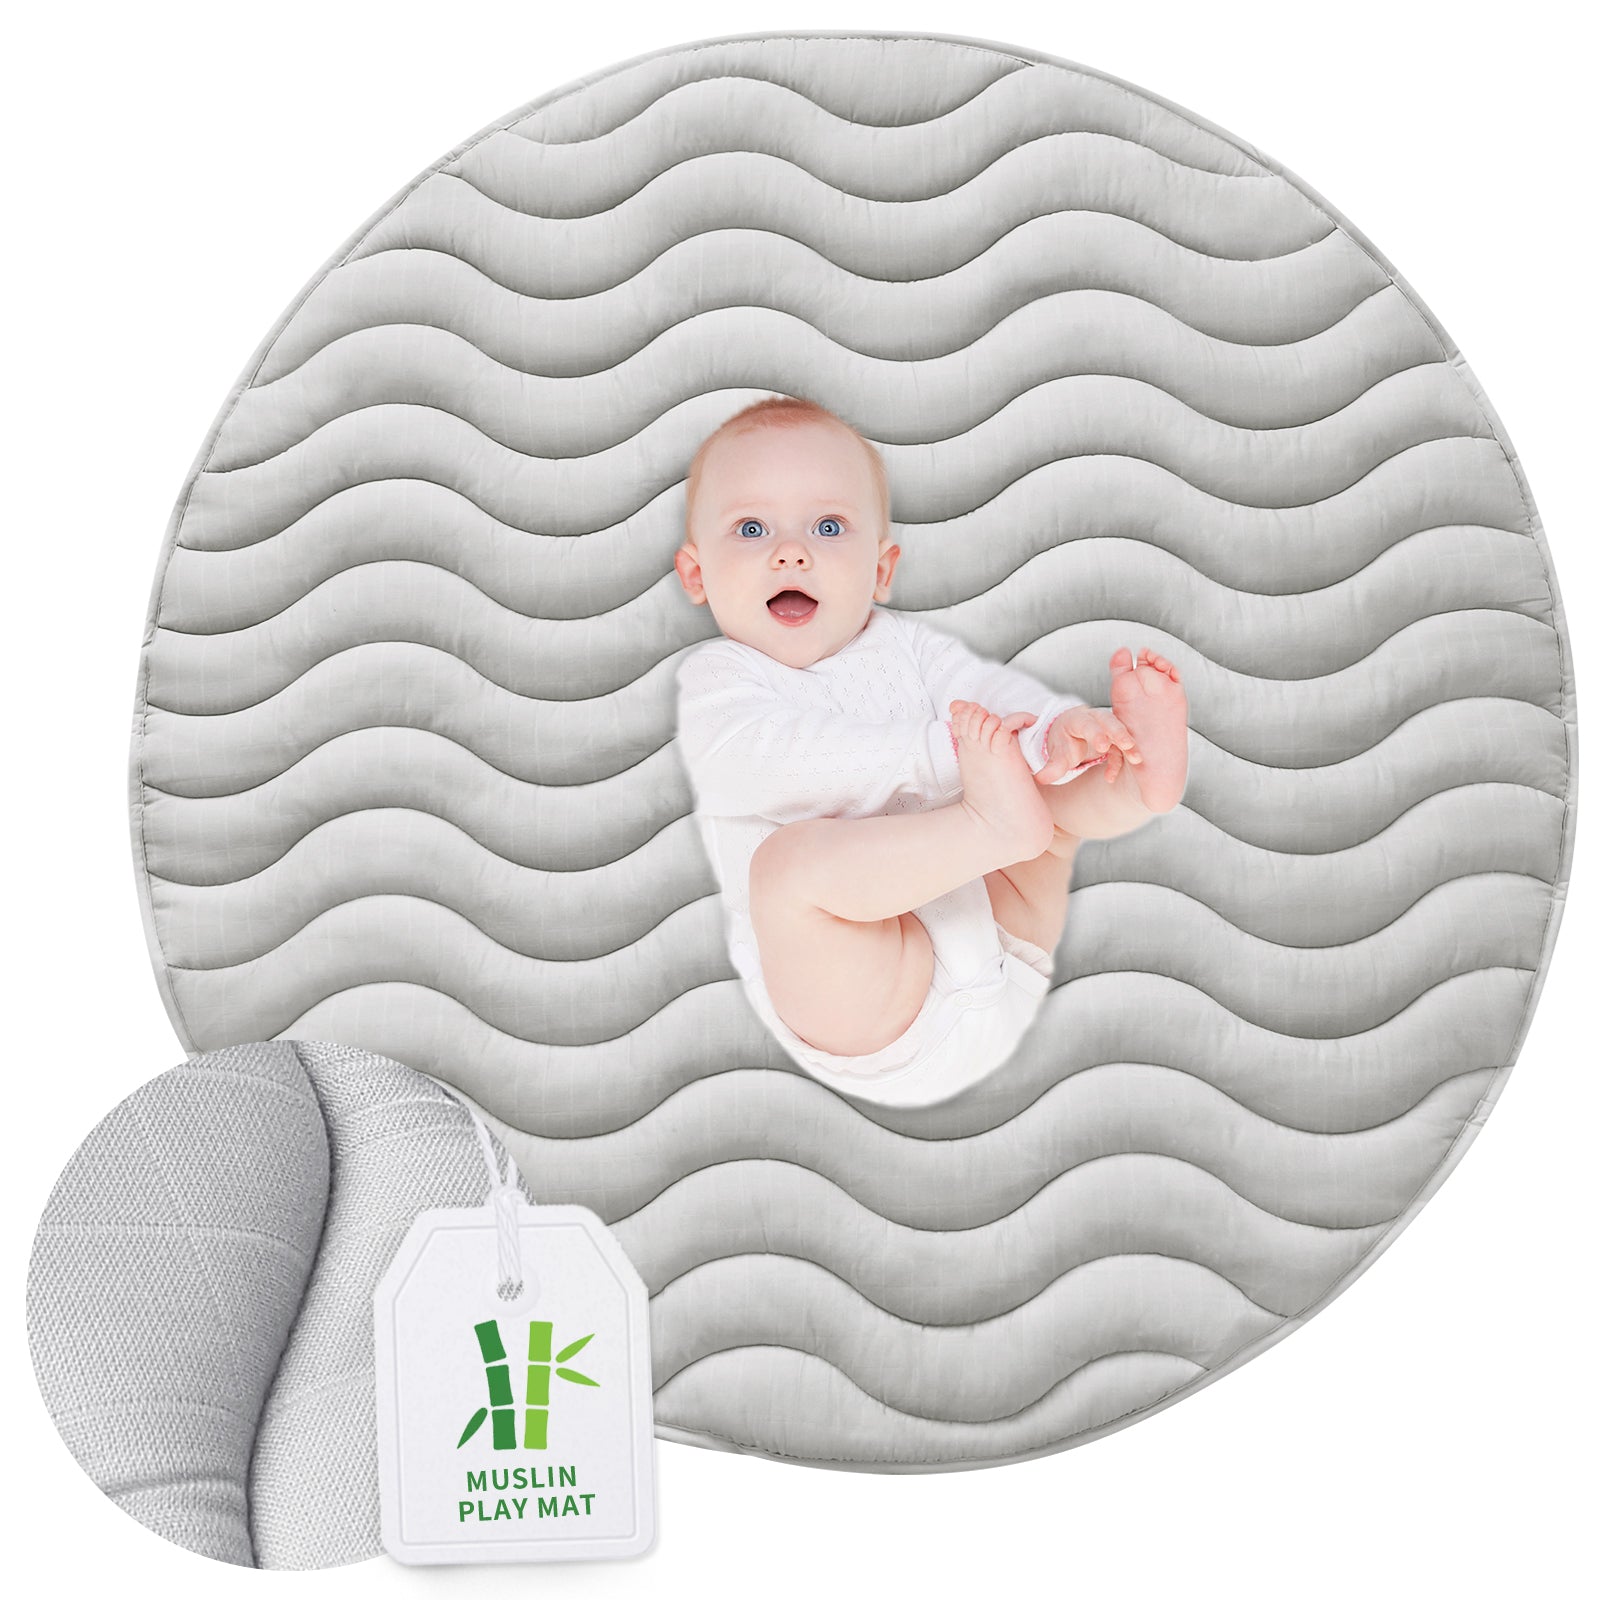 Muslin Baby Play Mat - Round 47'' x 47'', Padded Tummy Time Activity Mat for Infant & Toddler, Grey - Biloban Online Store